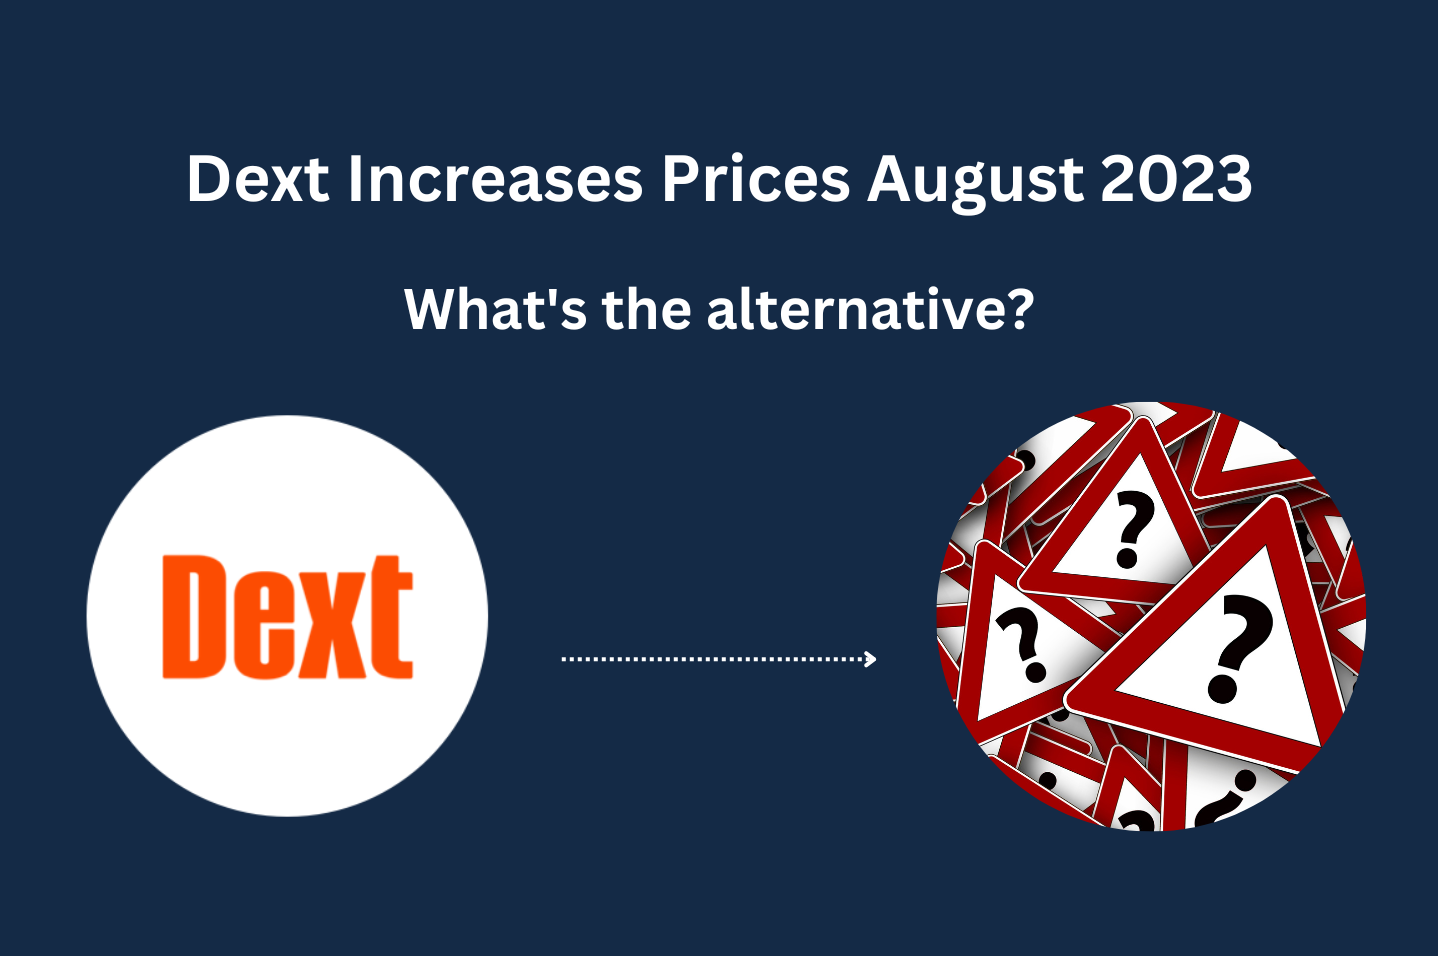 Dext Increases their prices, what's the alternative?